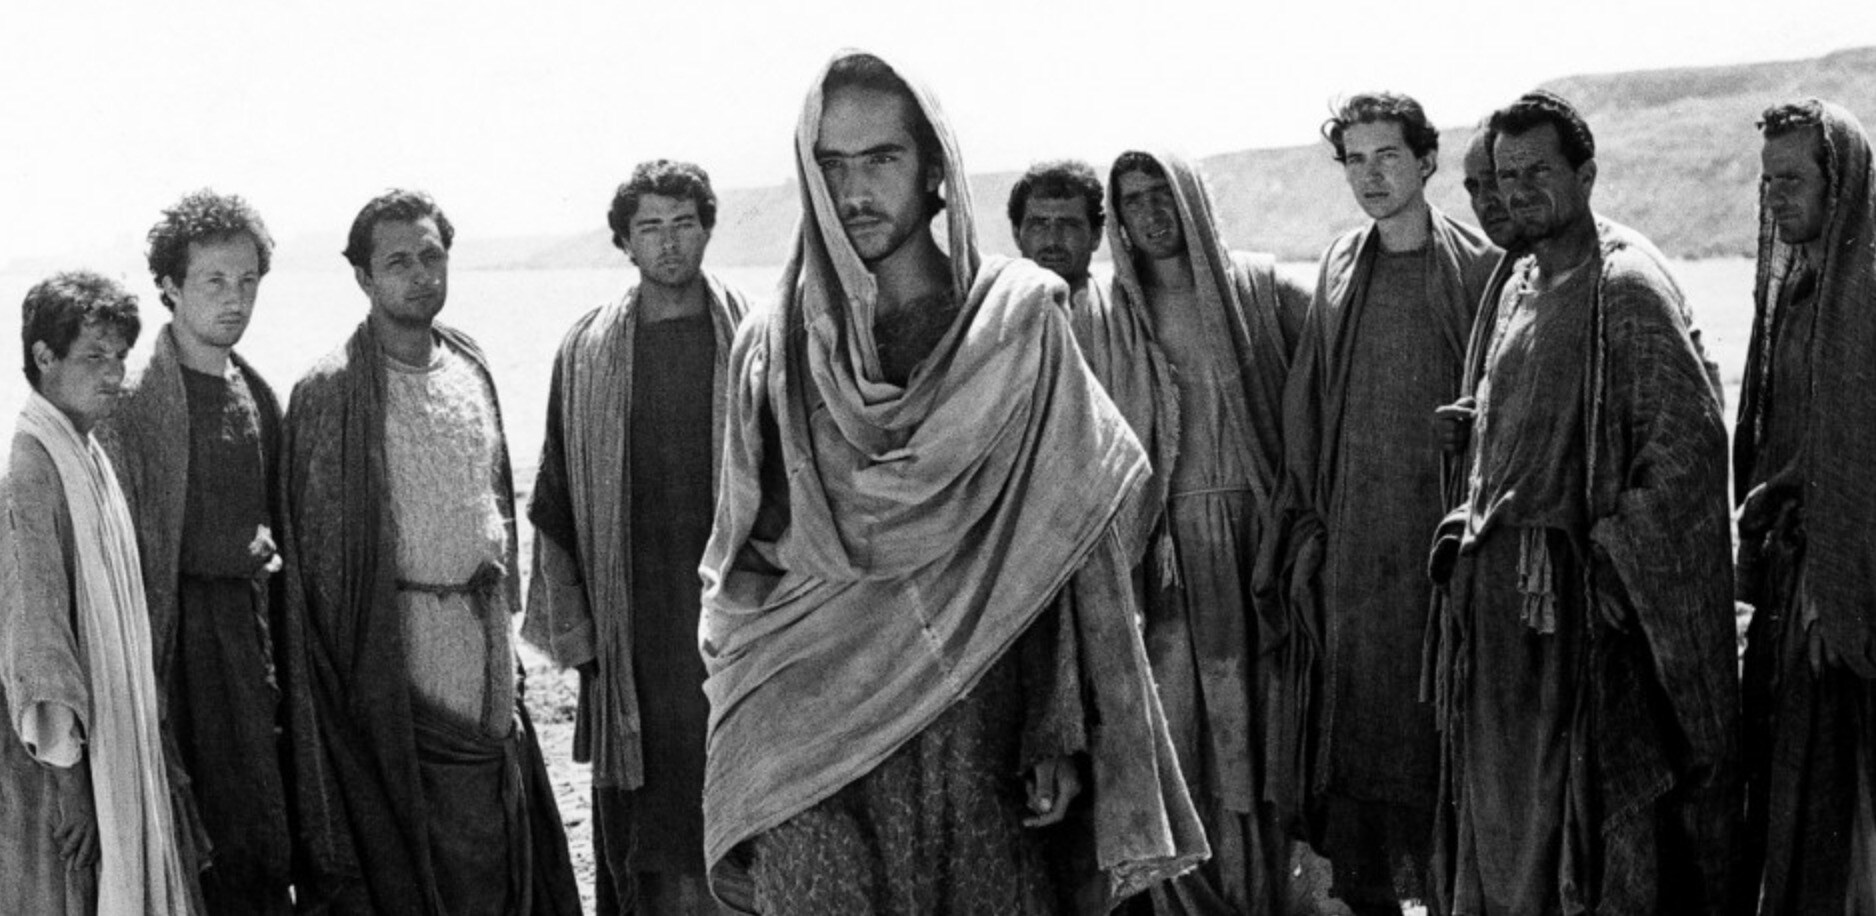 33-facts-about-the-movie-the-gospel-according-to-st-matthew